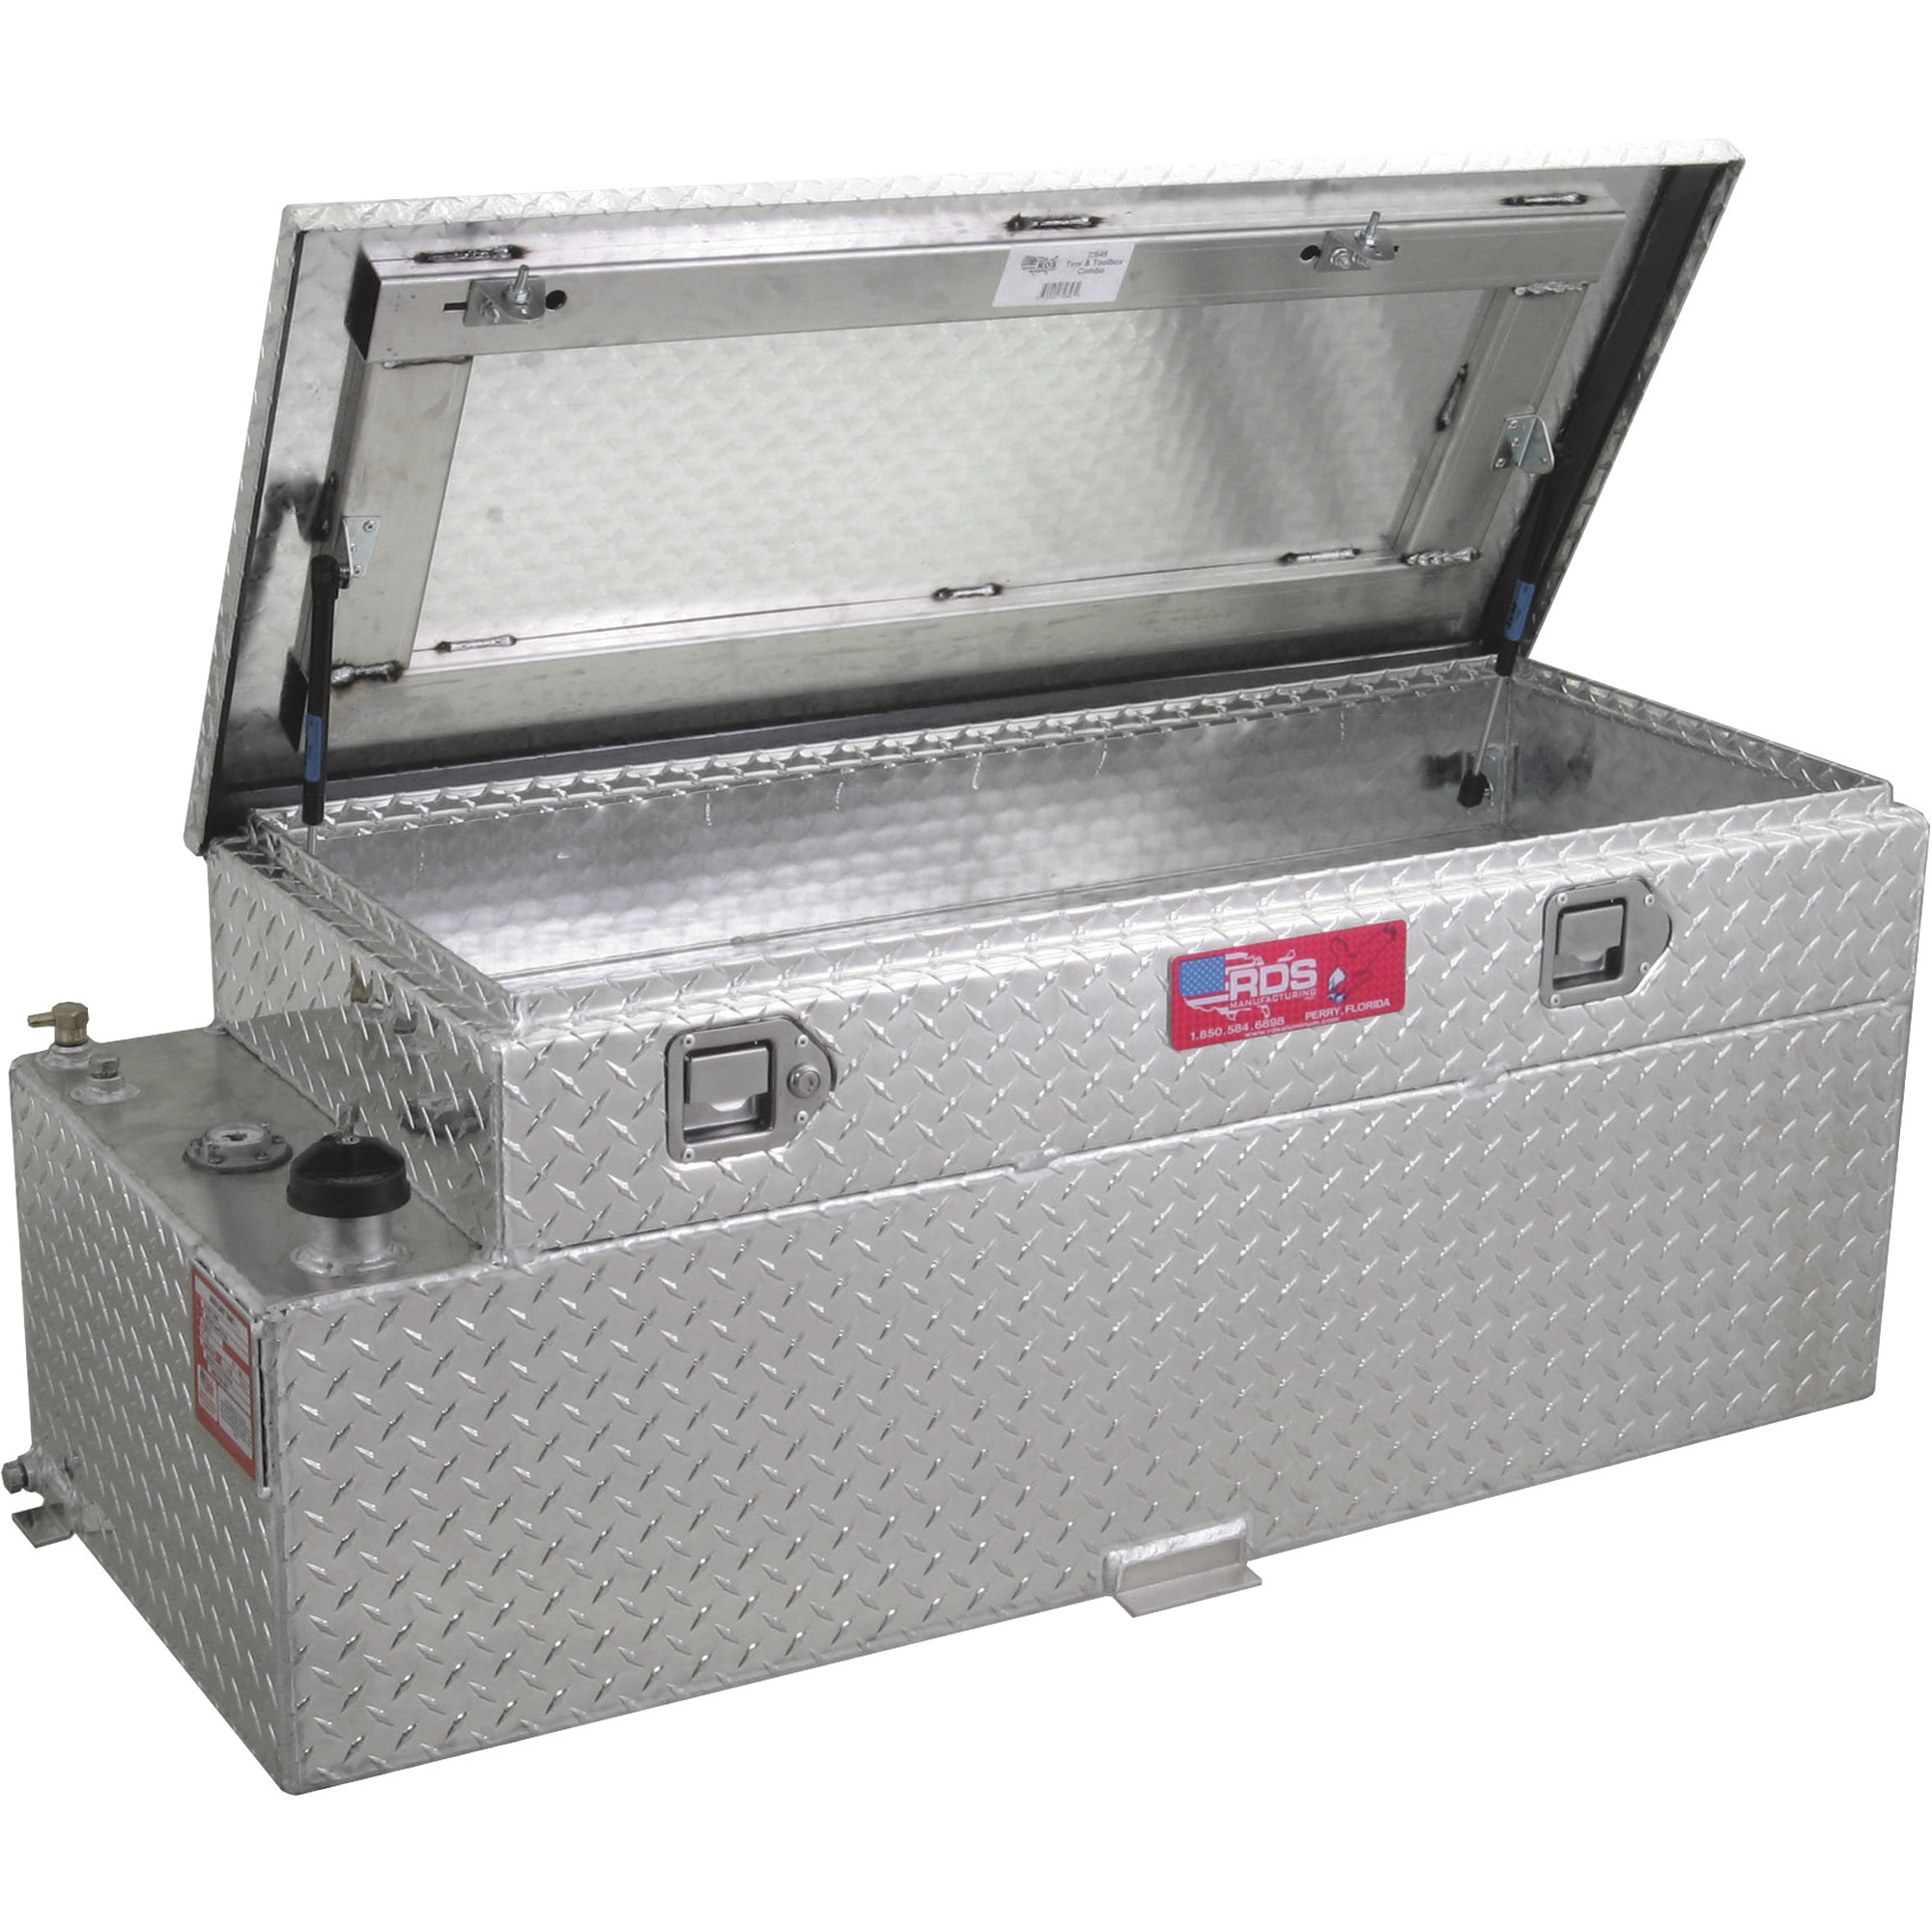 ATI FUEL TANKS AUX42FCBR9 Fuel Safe 42 gal auxiliary tank/toolbox combo  (cost includes install kit)